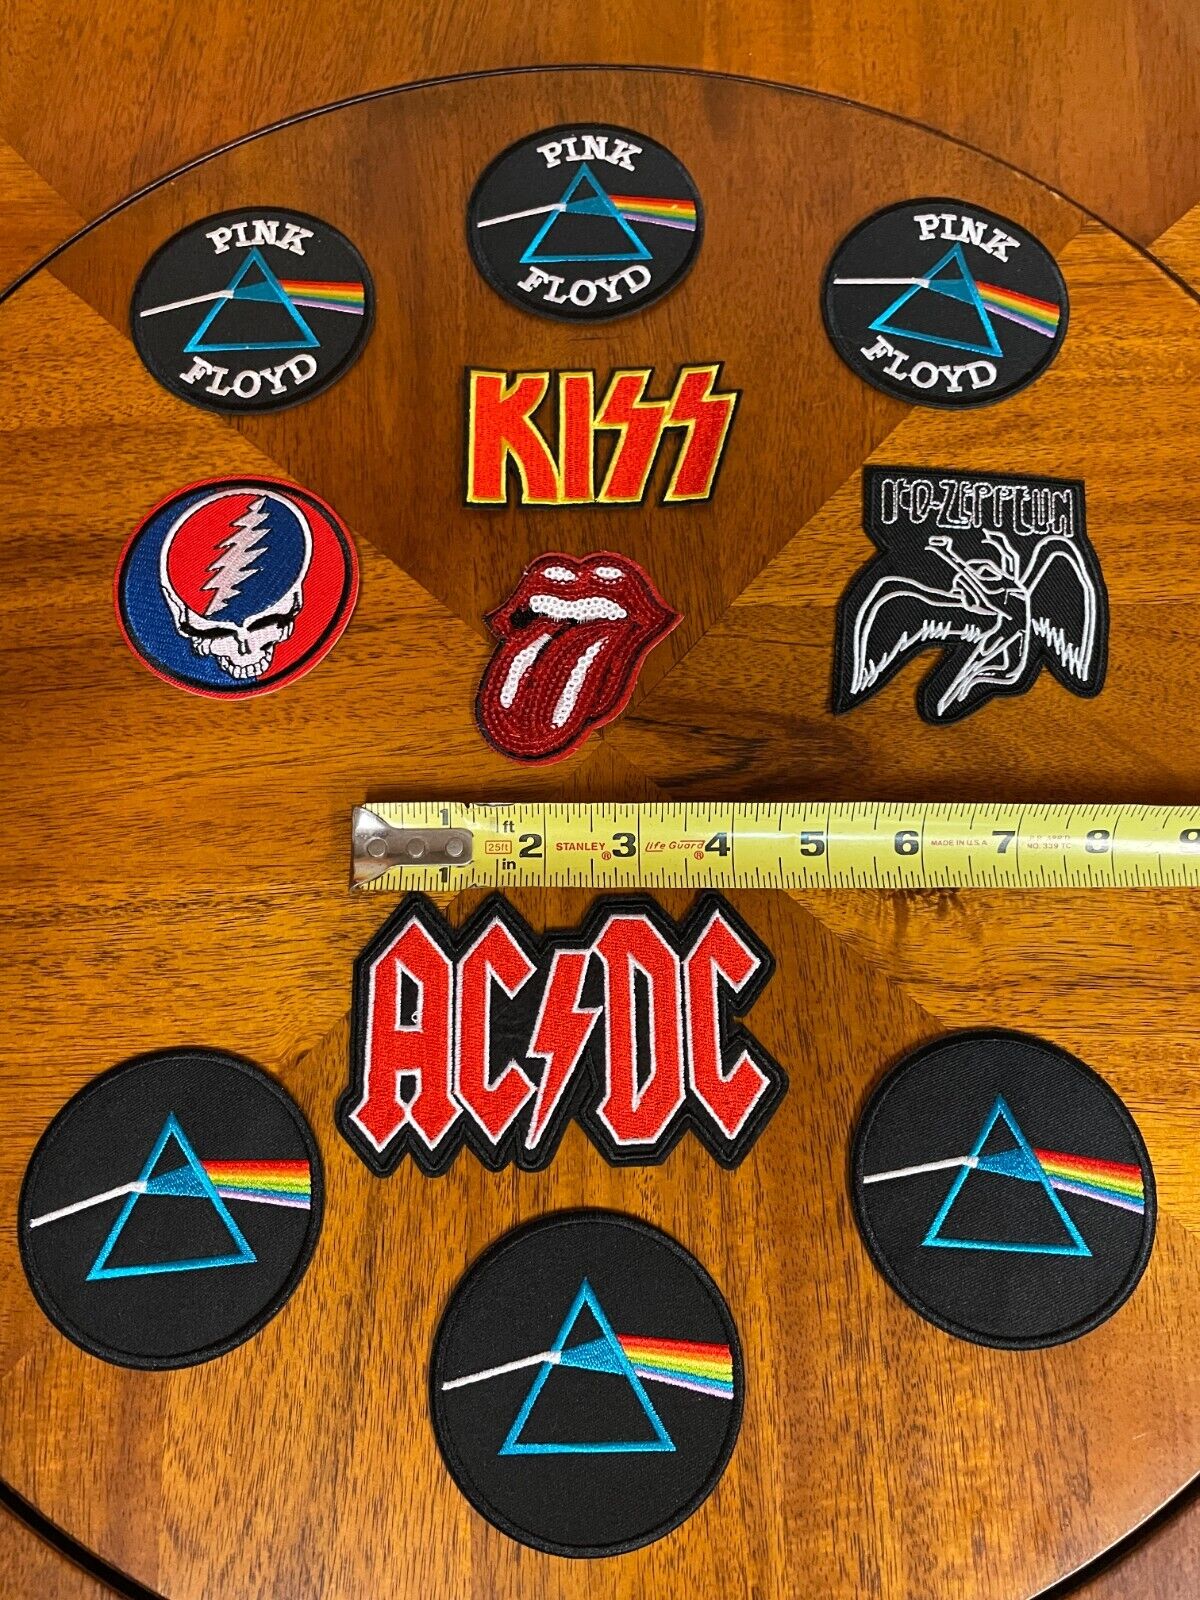 Lot of 11 HARD ROCK "IRON-ON PATCHES"  PINK FLOYD*ZEPPELIN*STONES*DEAD*ACDC*KISS X